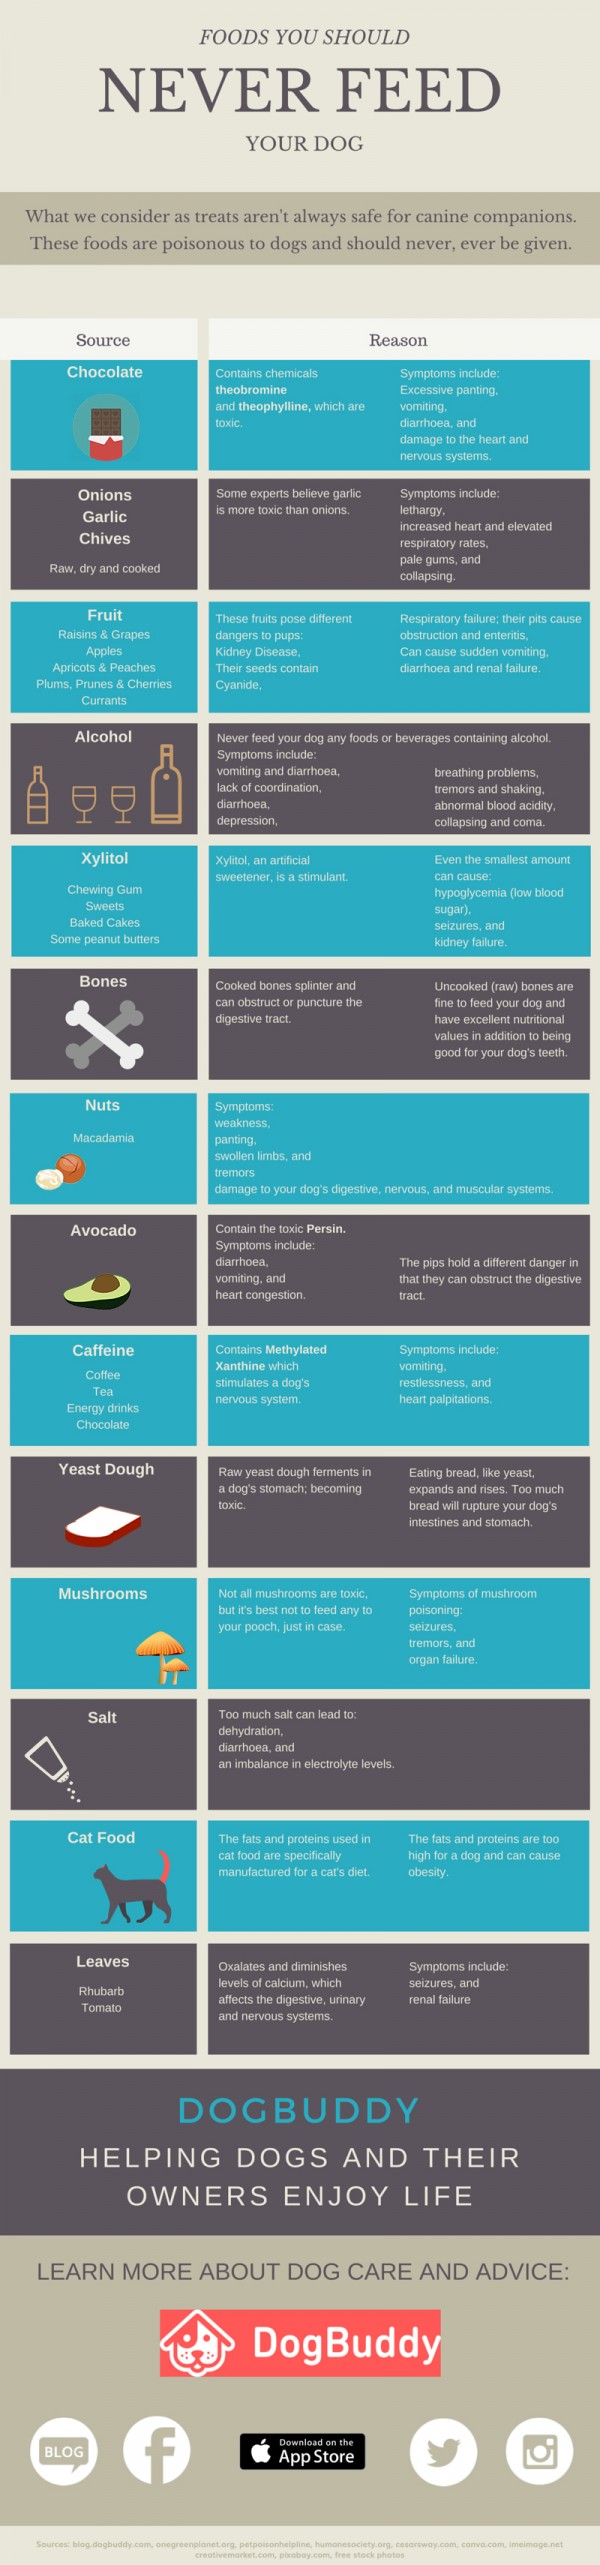 foods you should never feed your dog dogbuddy infographic